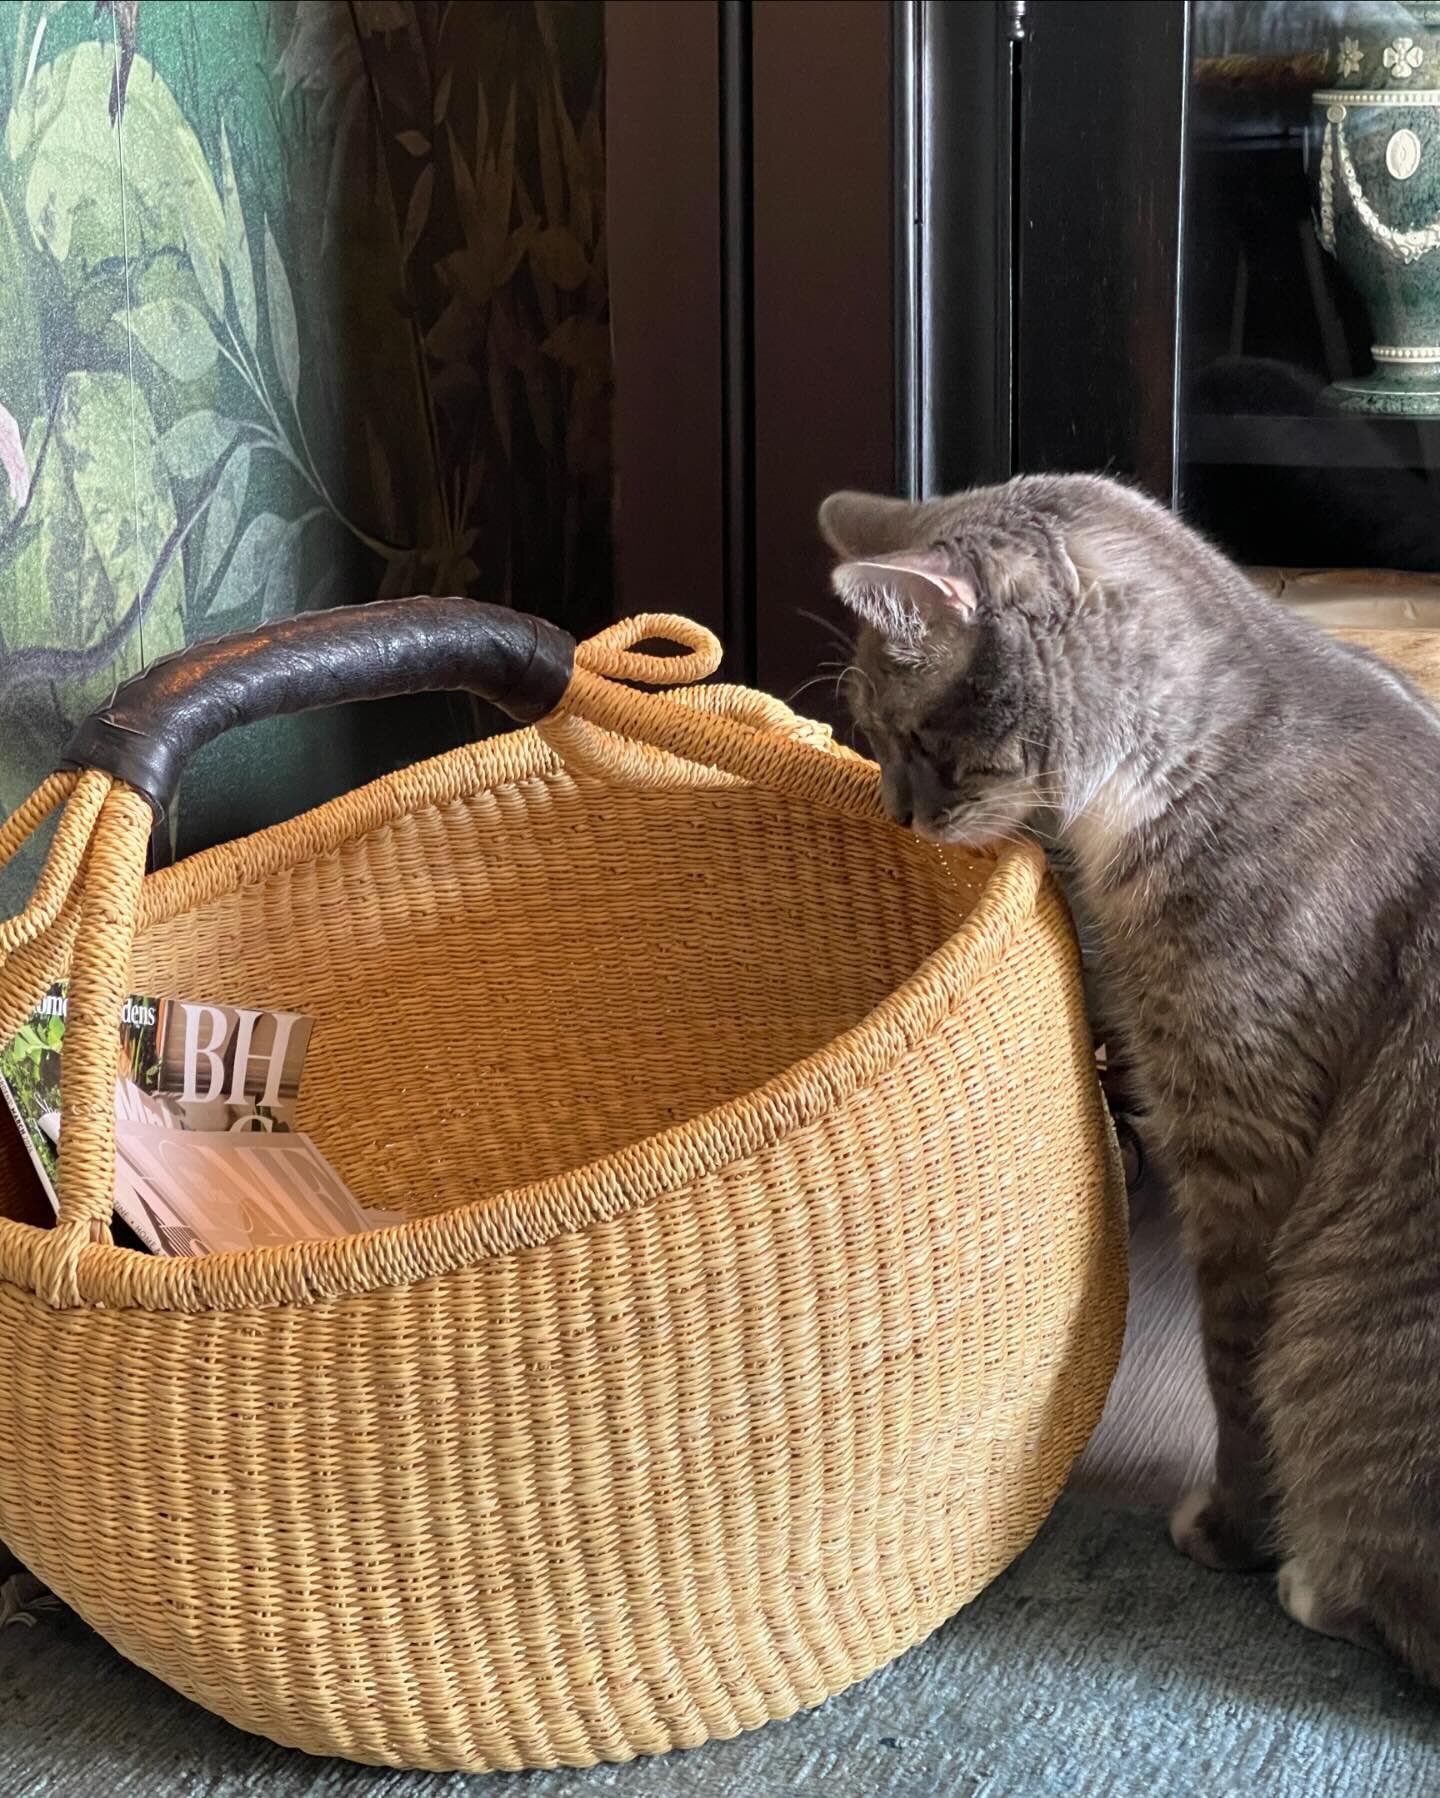 Now you see him. Now you&hellip; still see him. That&rsquo;s the best that Franklin and I can do for a magic trick with this gorgeous basket from @storyandteller in Minnesota.

It&rsquo;s a little hard to see, but he was dying to get a look at the la